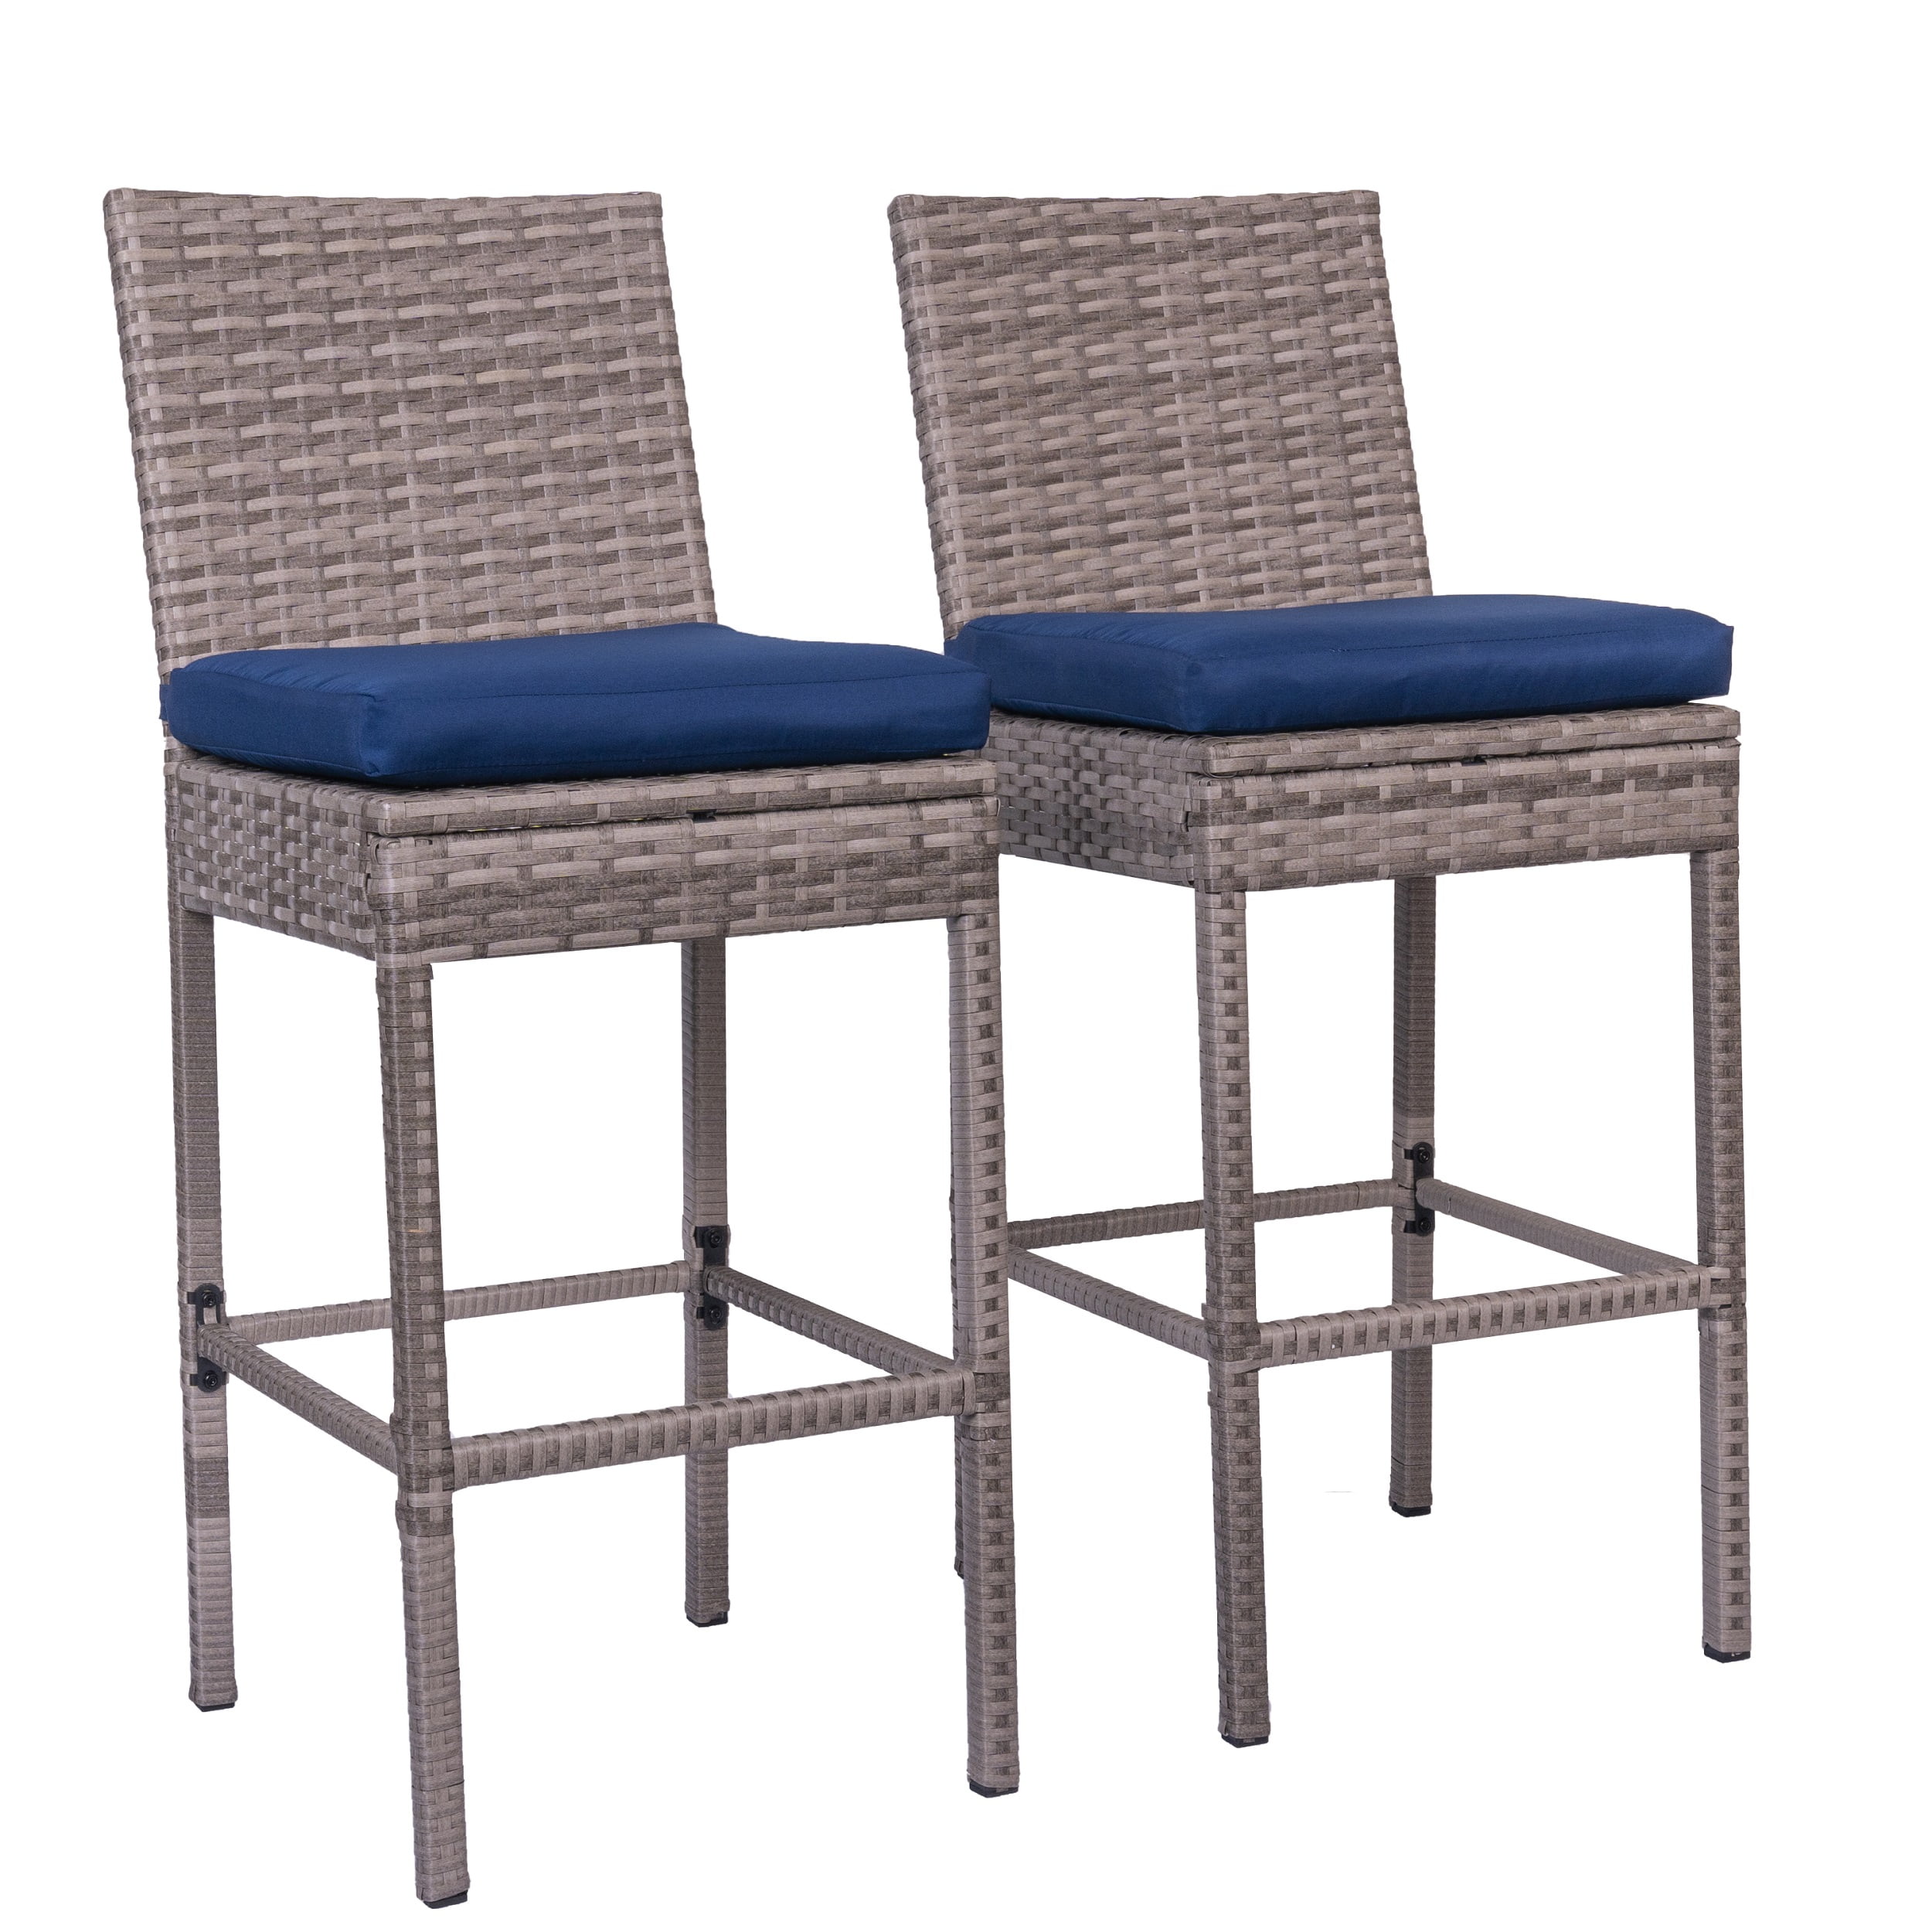 Set of 2 Grey Crosley Furniture Palm Harbor Outdoor Wicker 29-inch Bar Height Stools 